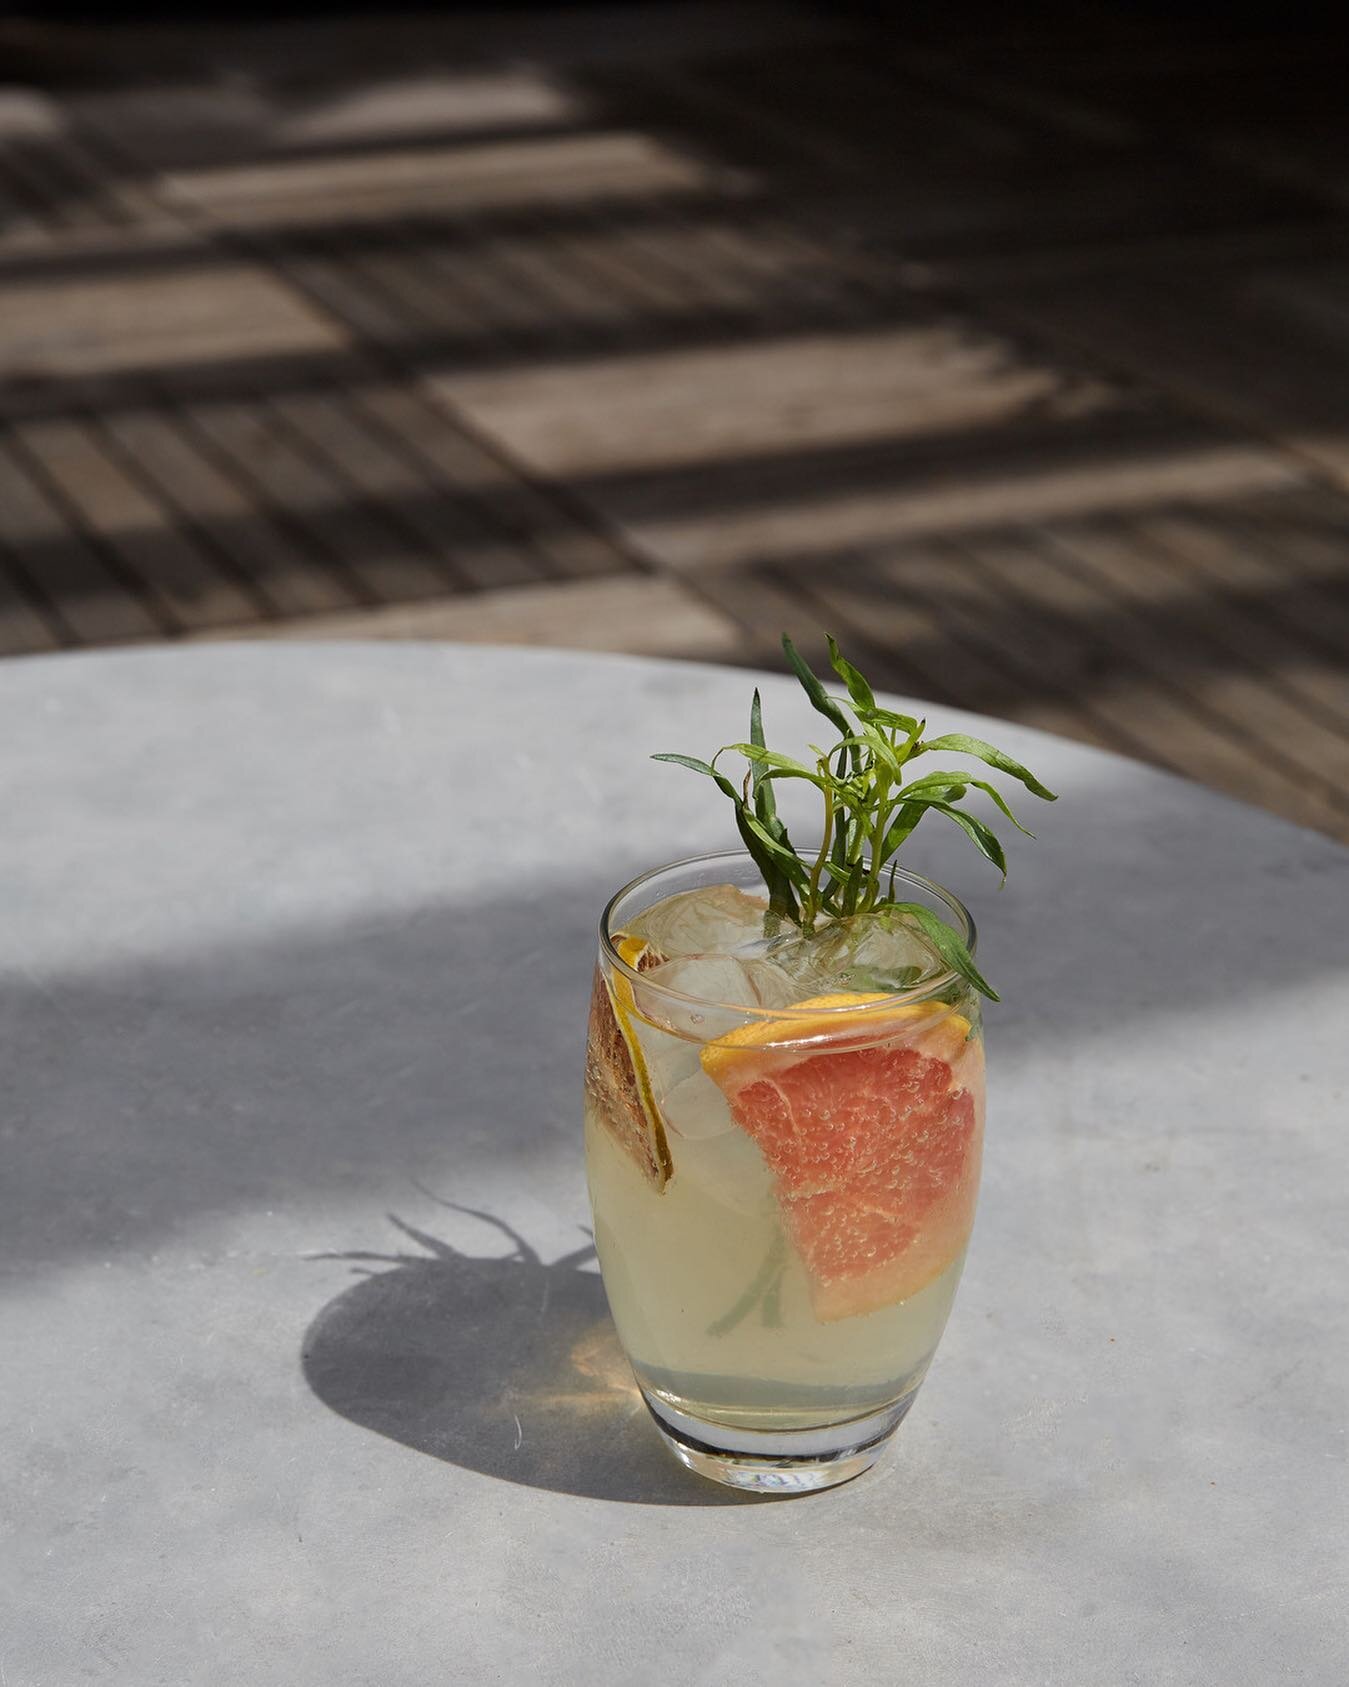 A drink is never complete without a garnish #MargotLosAngeles